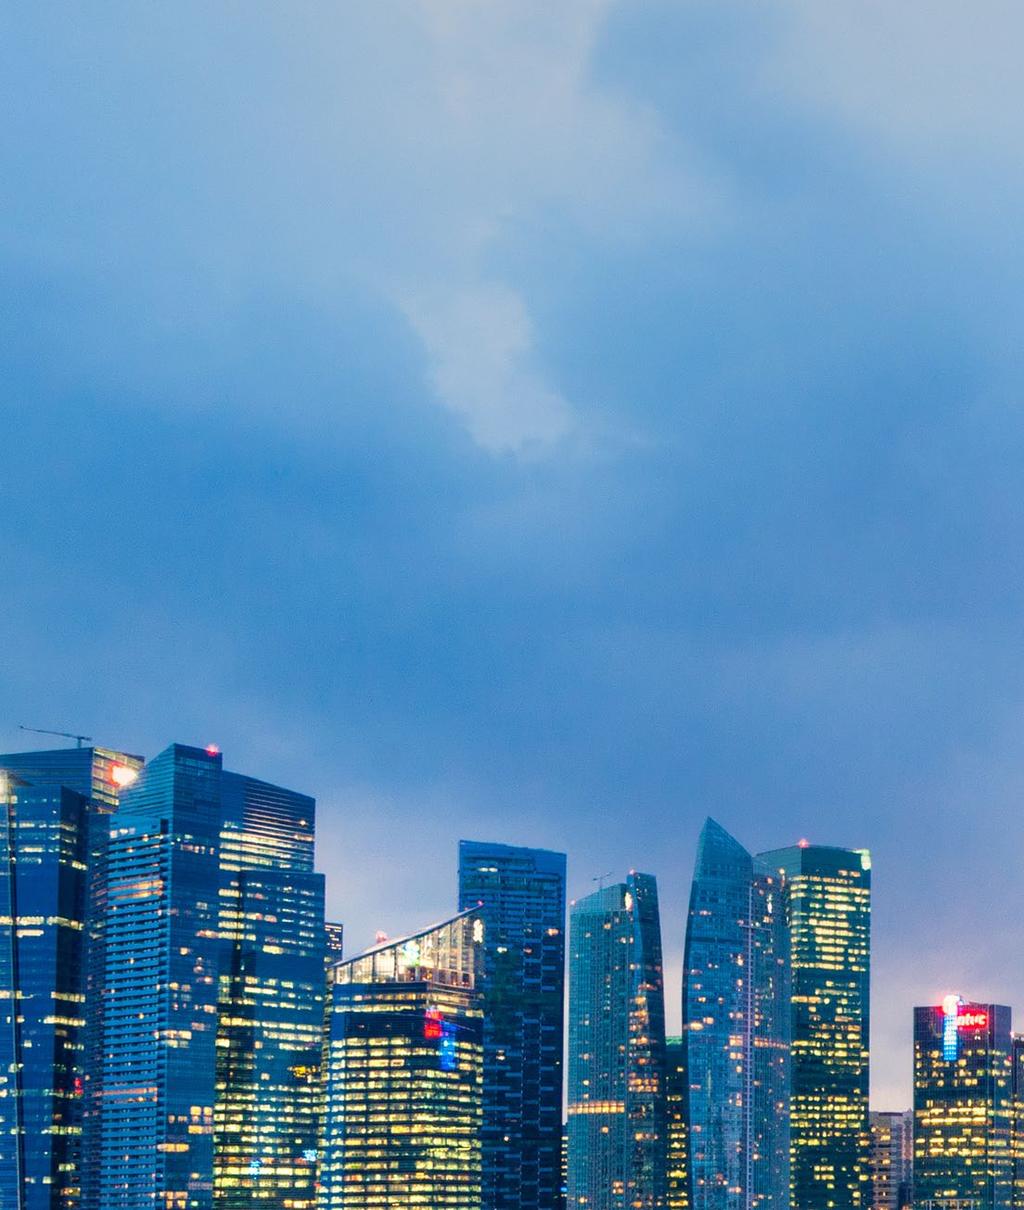 SINGAPOREKey Themes Flight to Quality Grade A CBD office rents are expected to bottom out in 17 The office leasing market appears to be stabilizing.